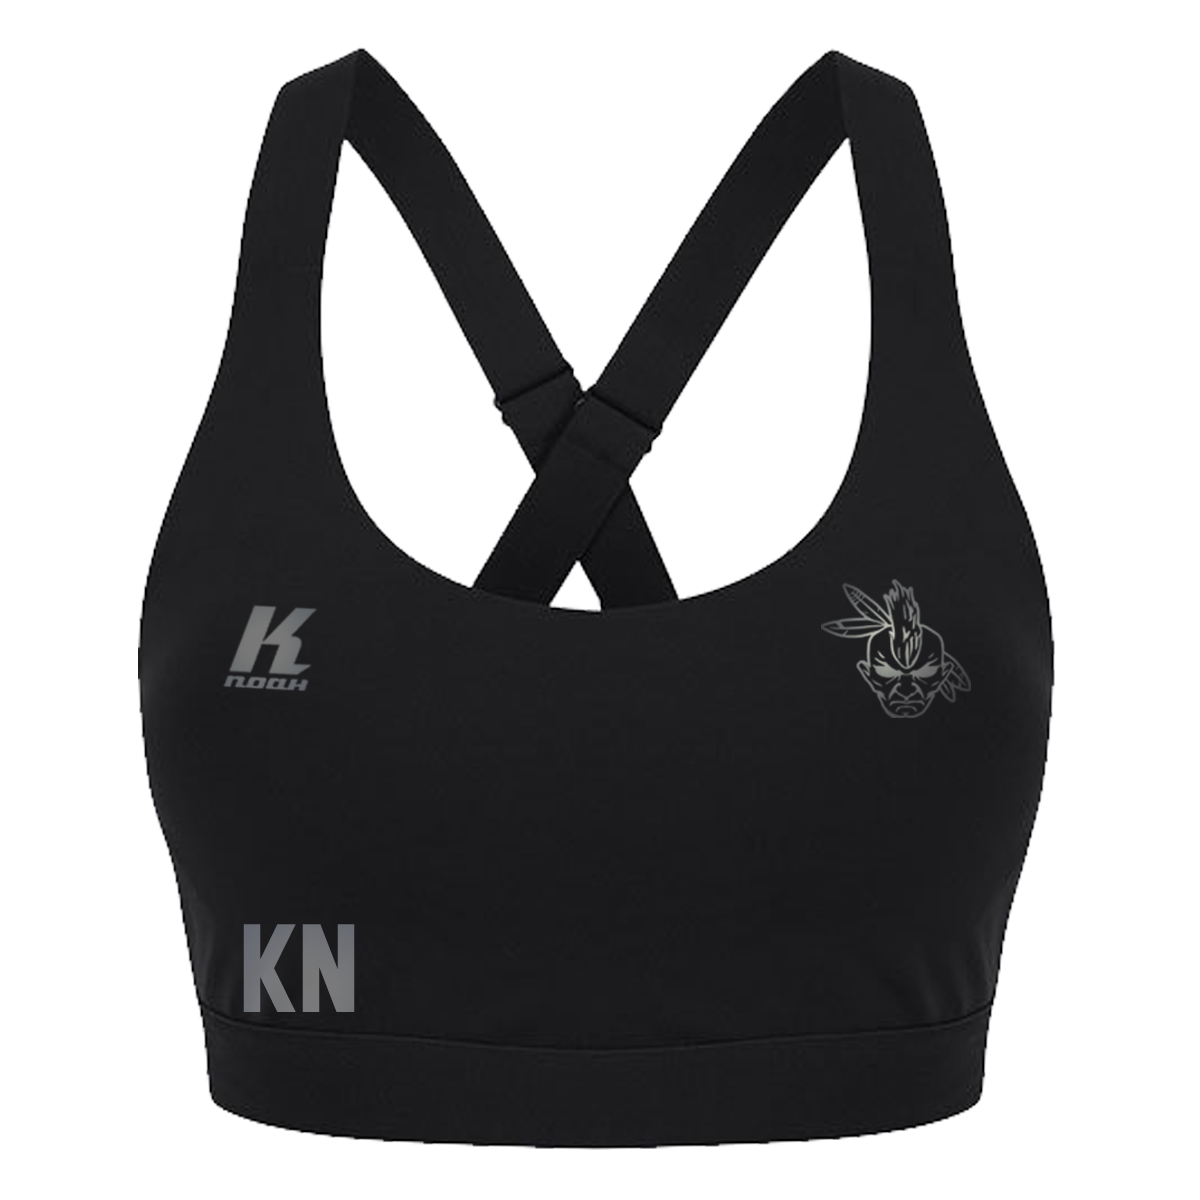 Warriors "Blackline" Womens Impact Core Bra TL371 with Initials/Playernumber